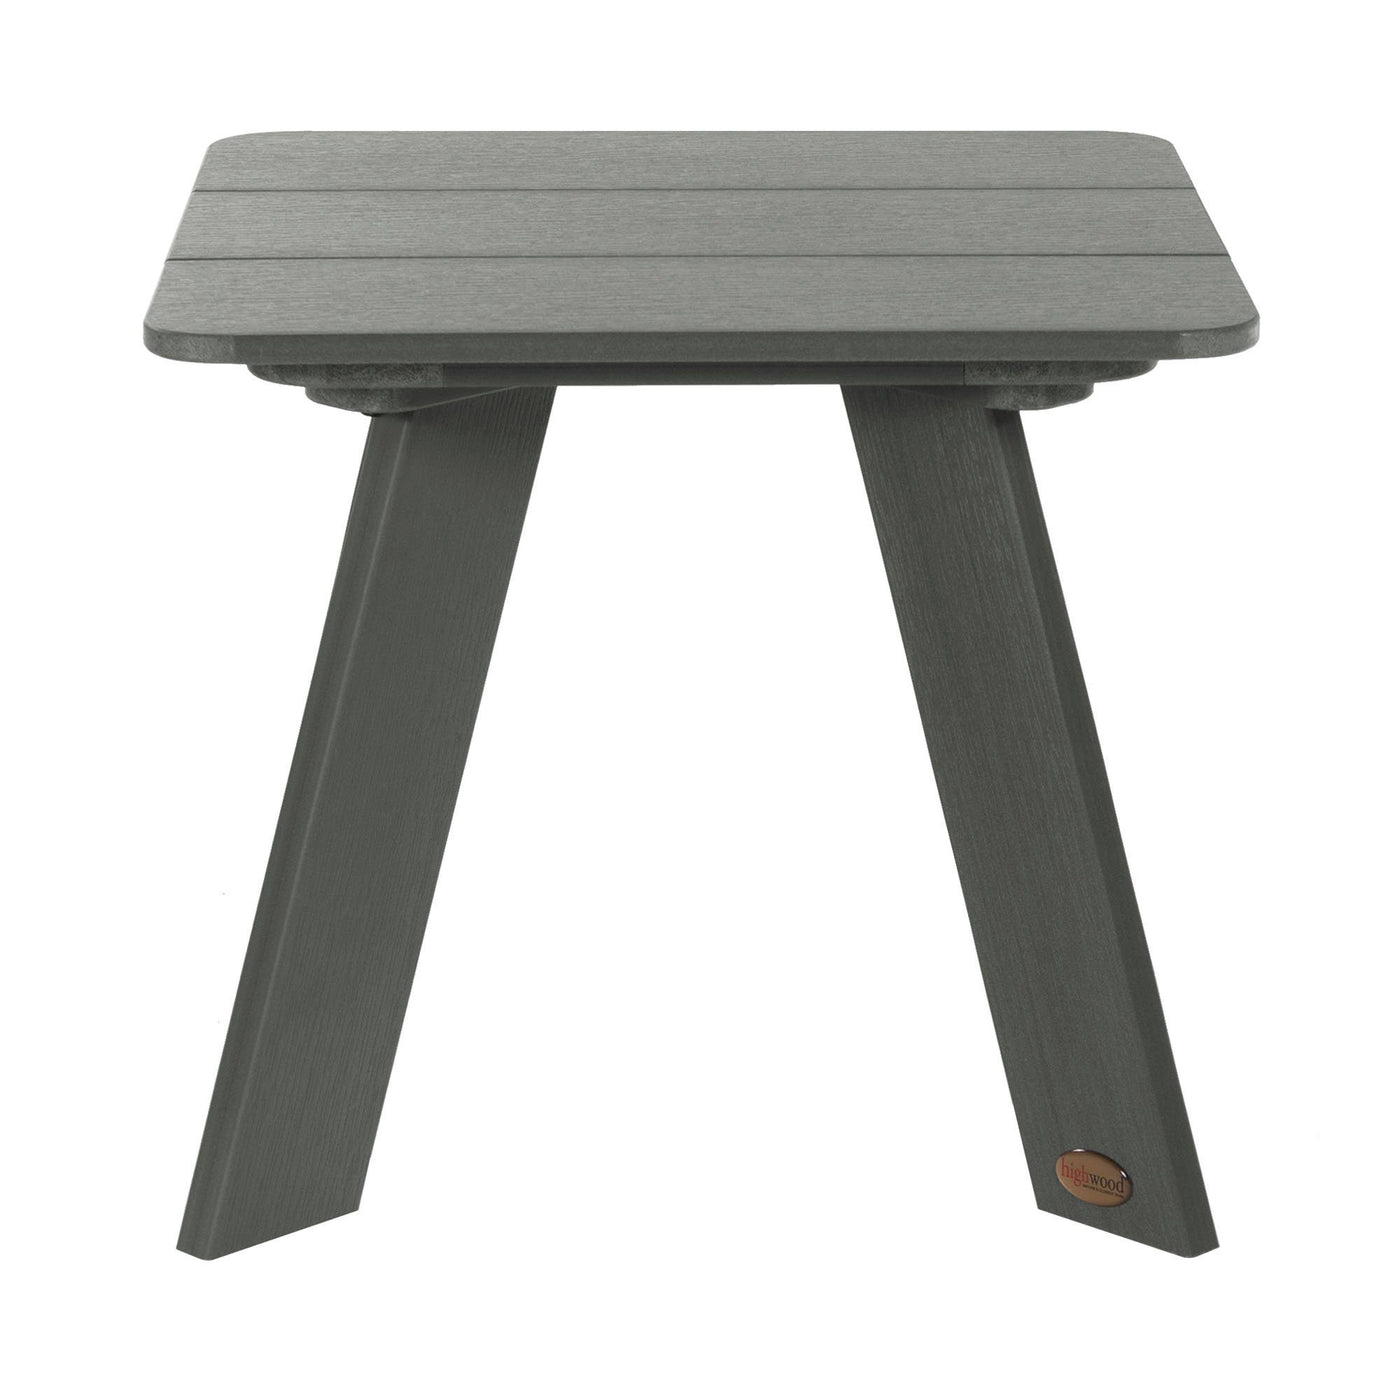 Front view of Italica Modern side table in Coastal Teak Gray